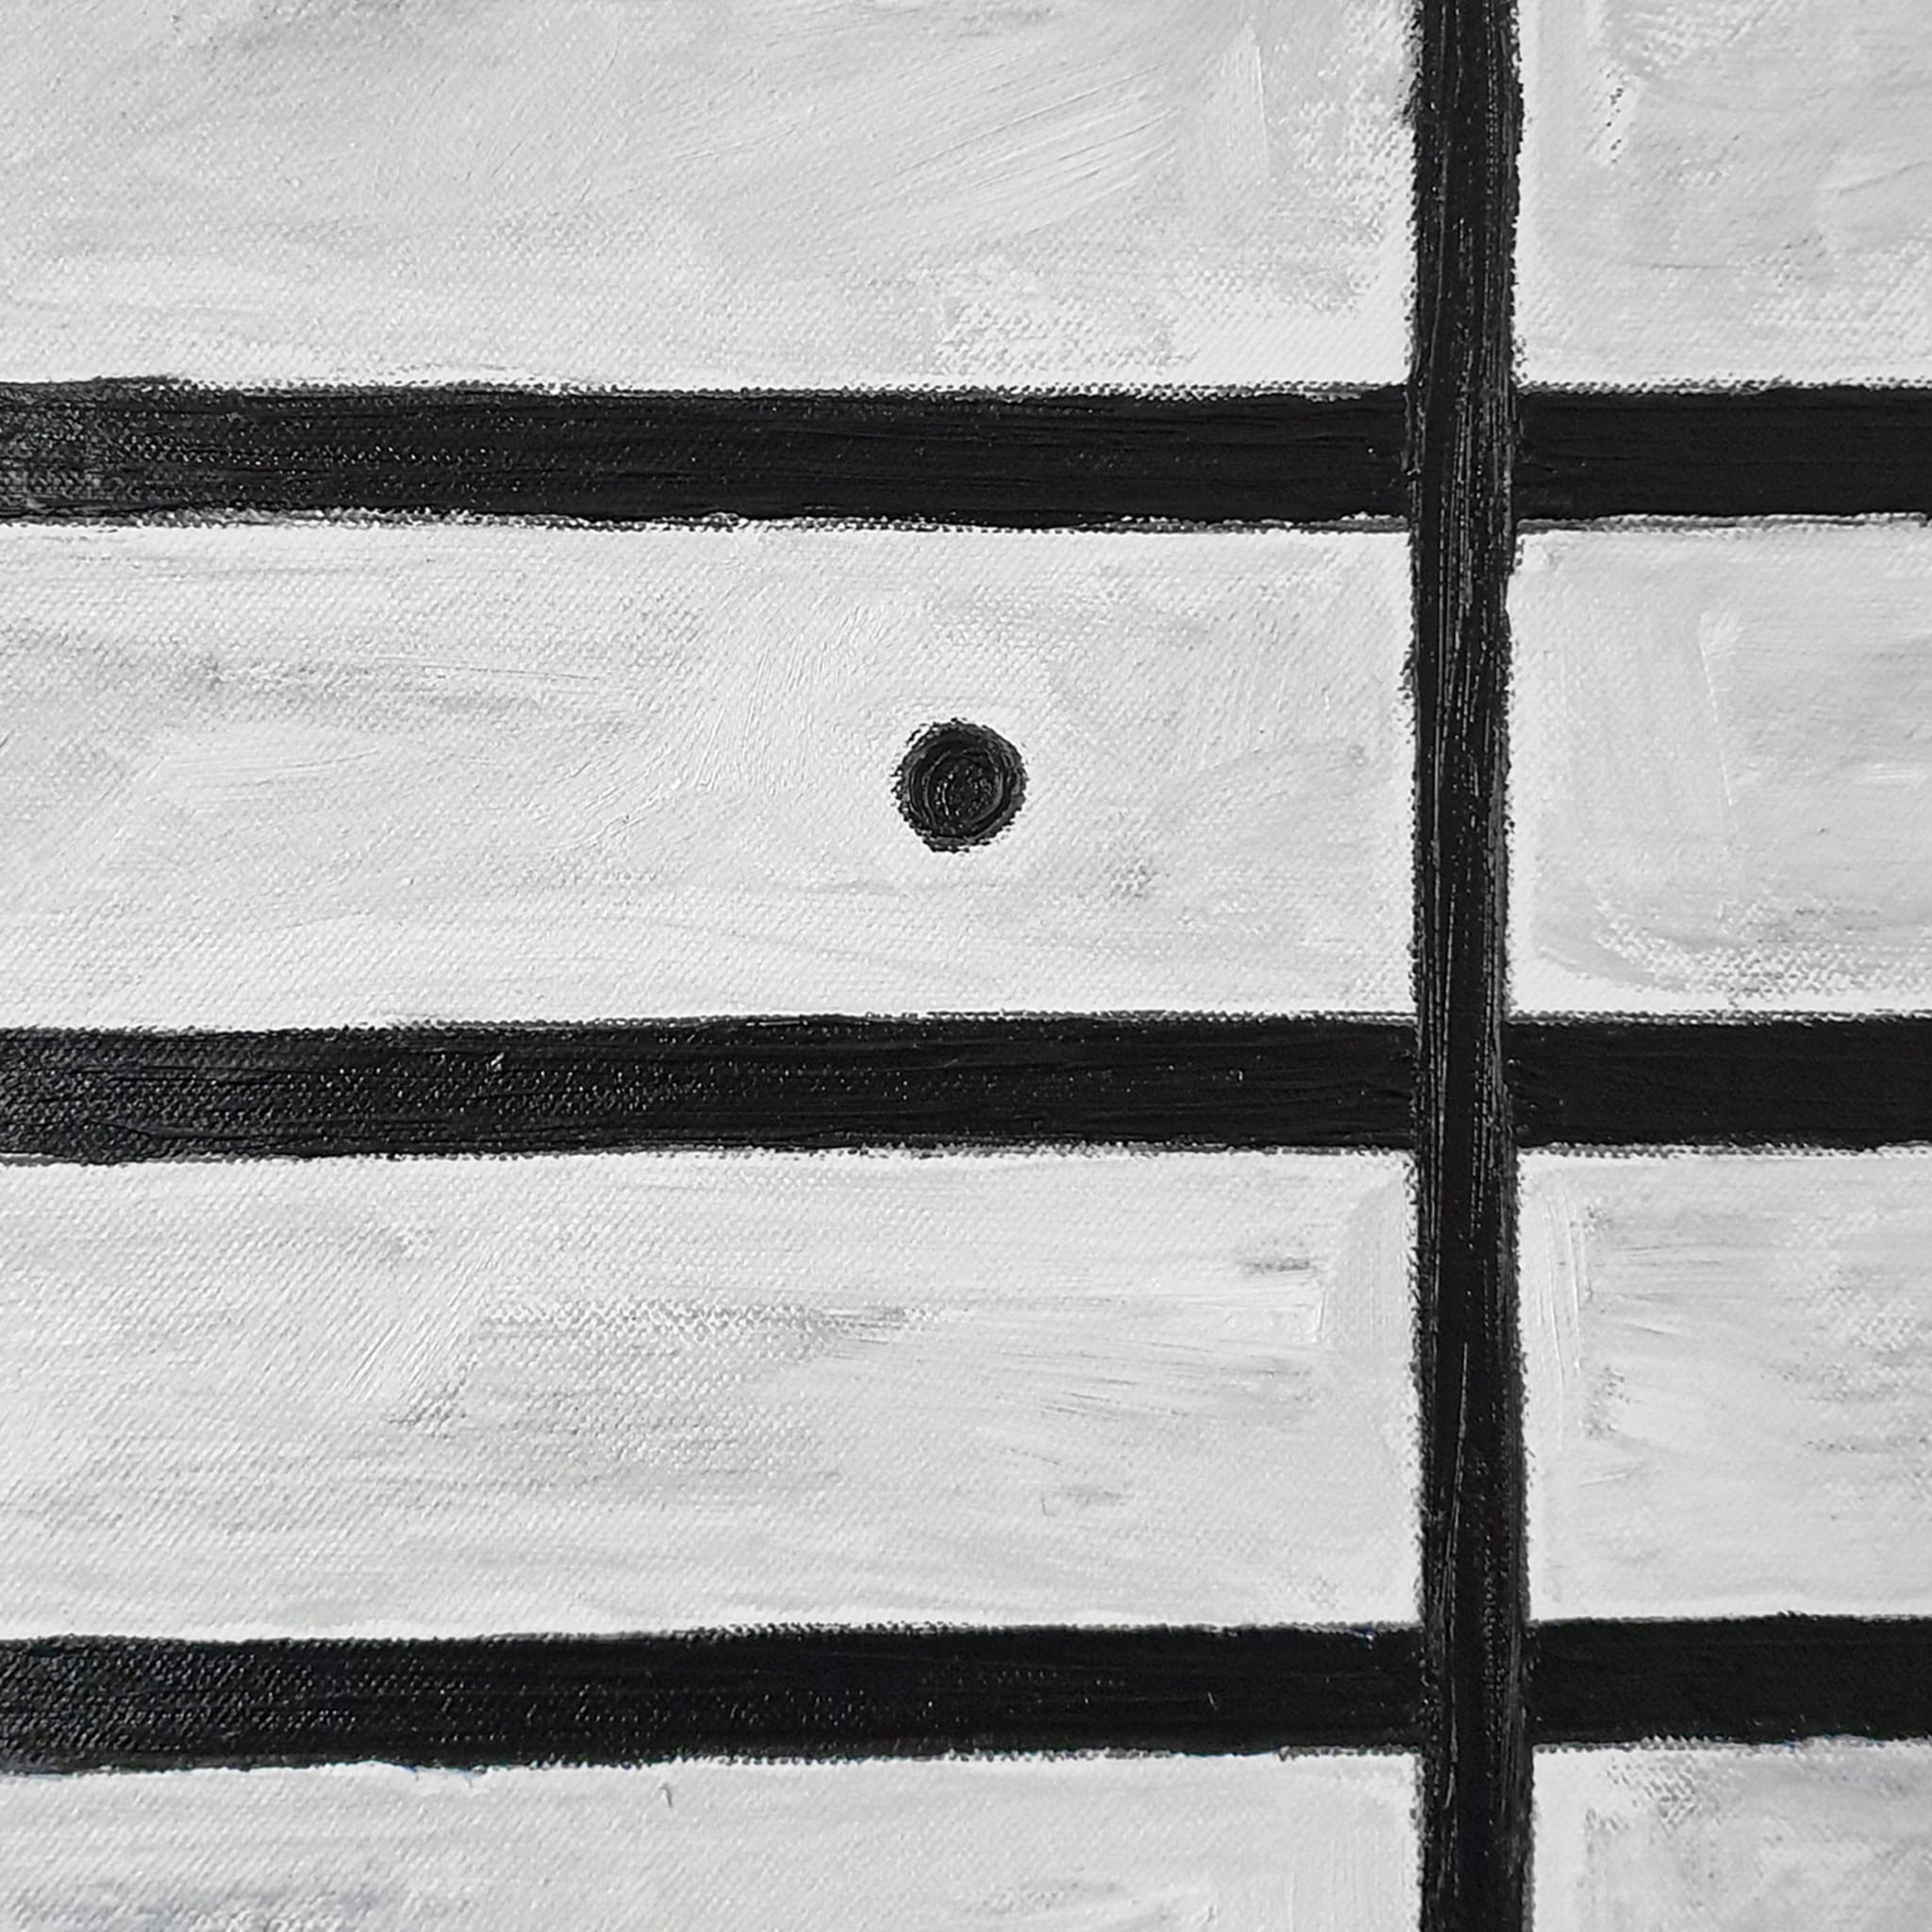 Panel N. 1 Head with Black Rectangles - Alternative view 1